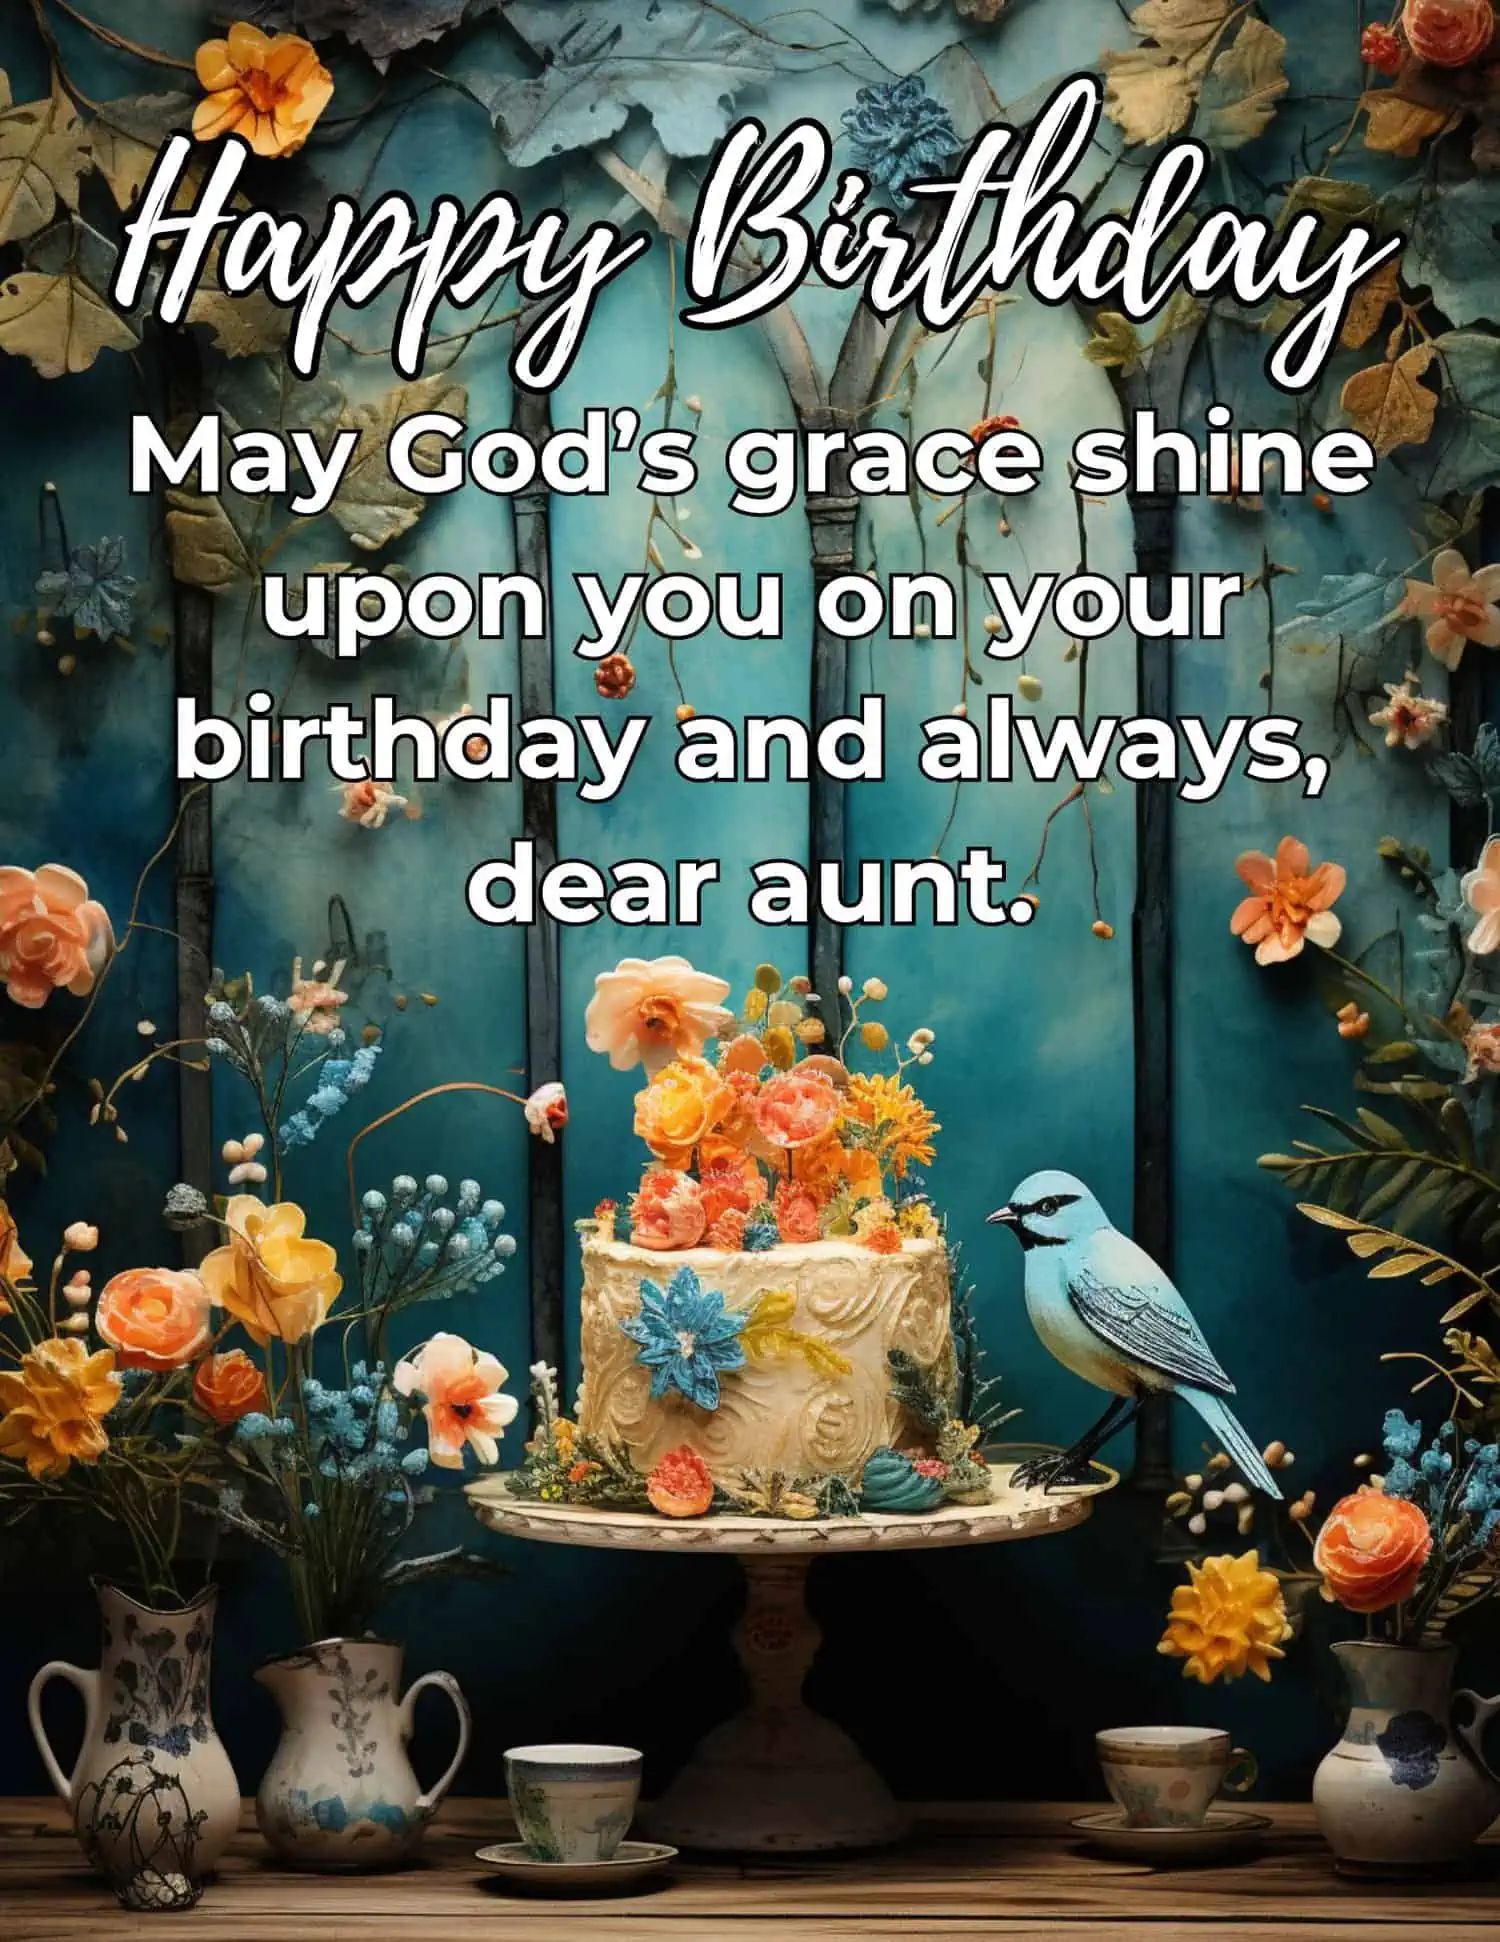 A heartfelt collection of religious birthday greetings for aunts, combining spiritual blessings with warm familial sentiments.